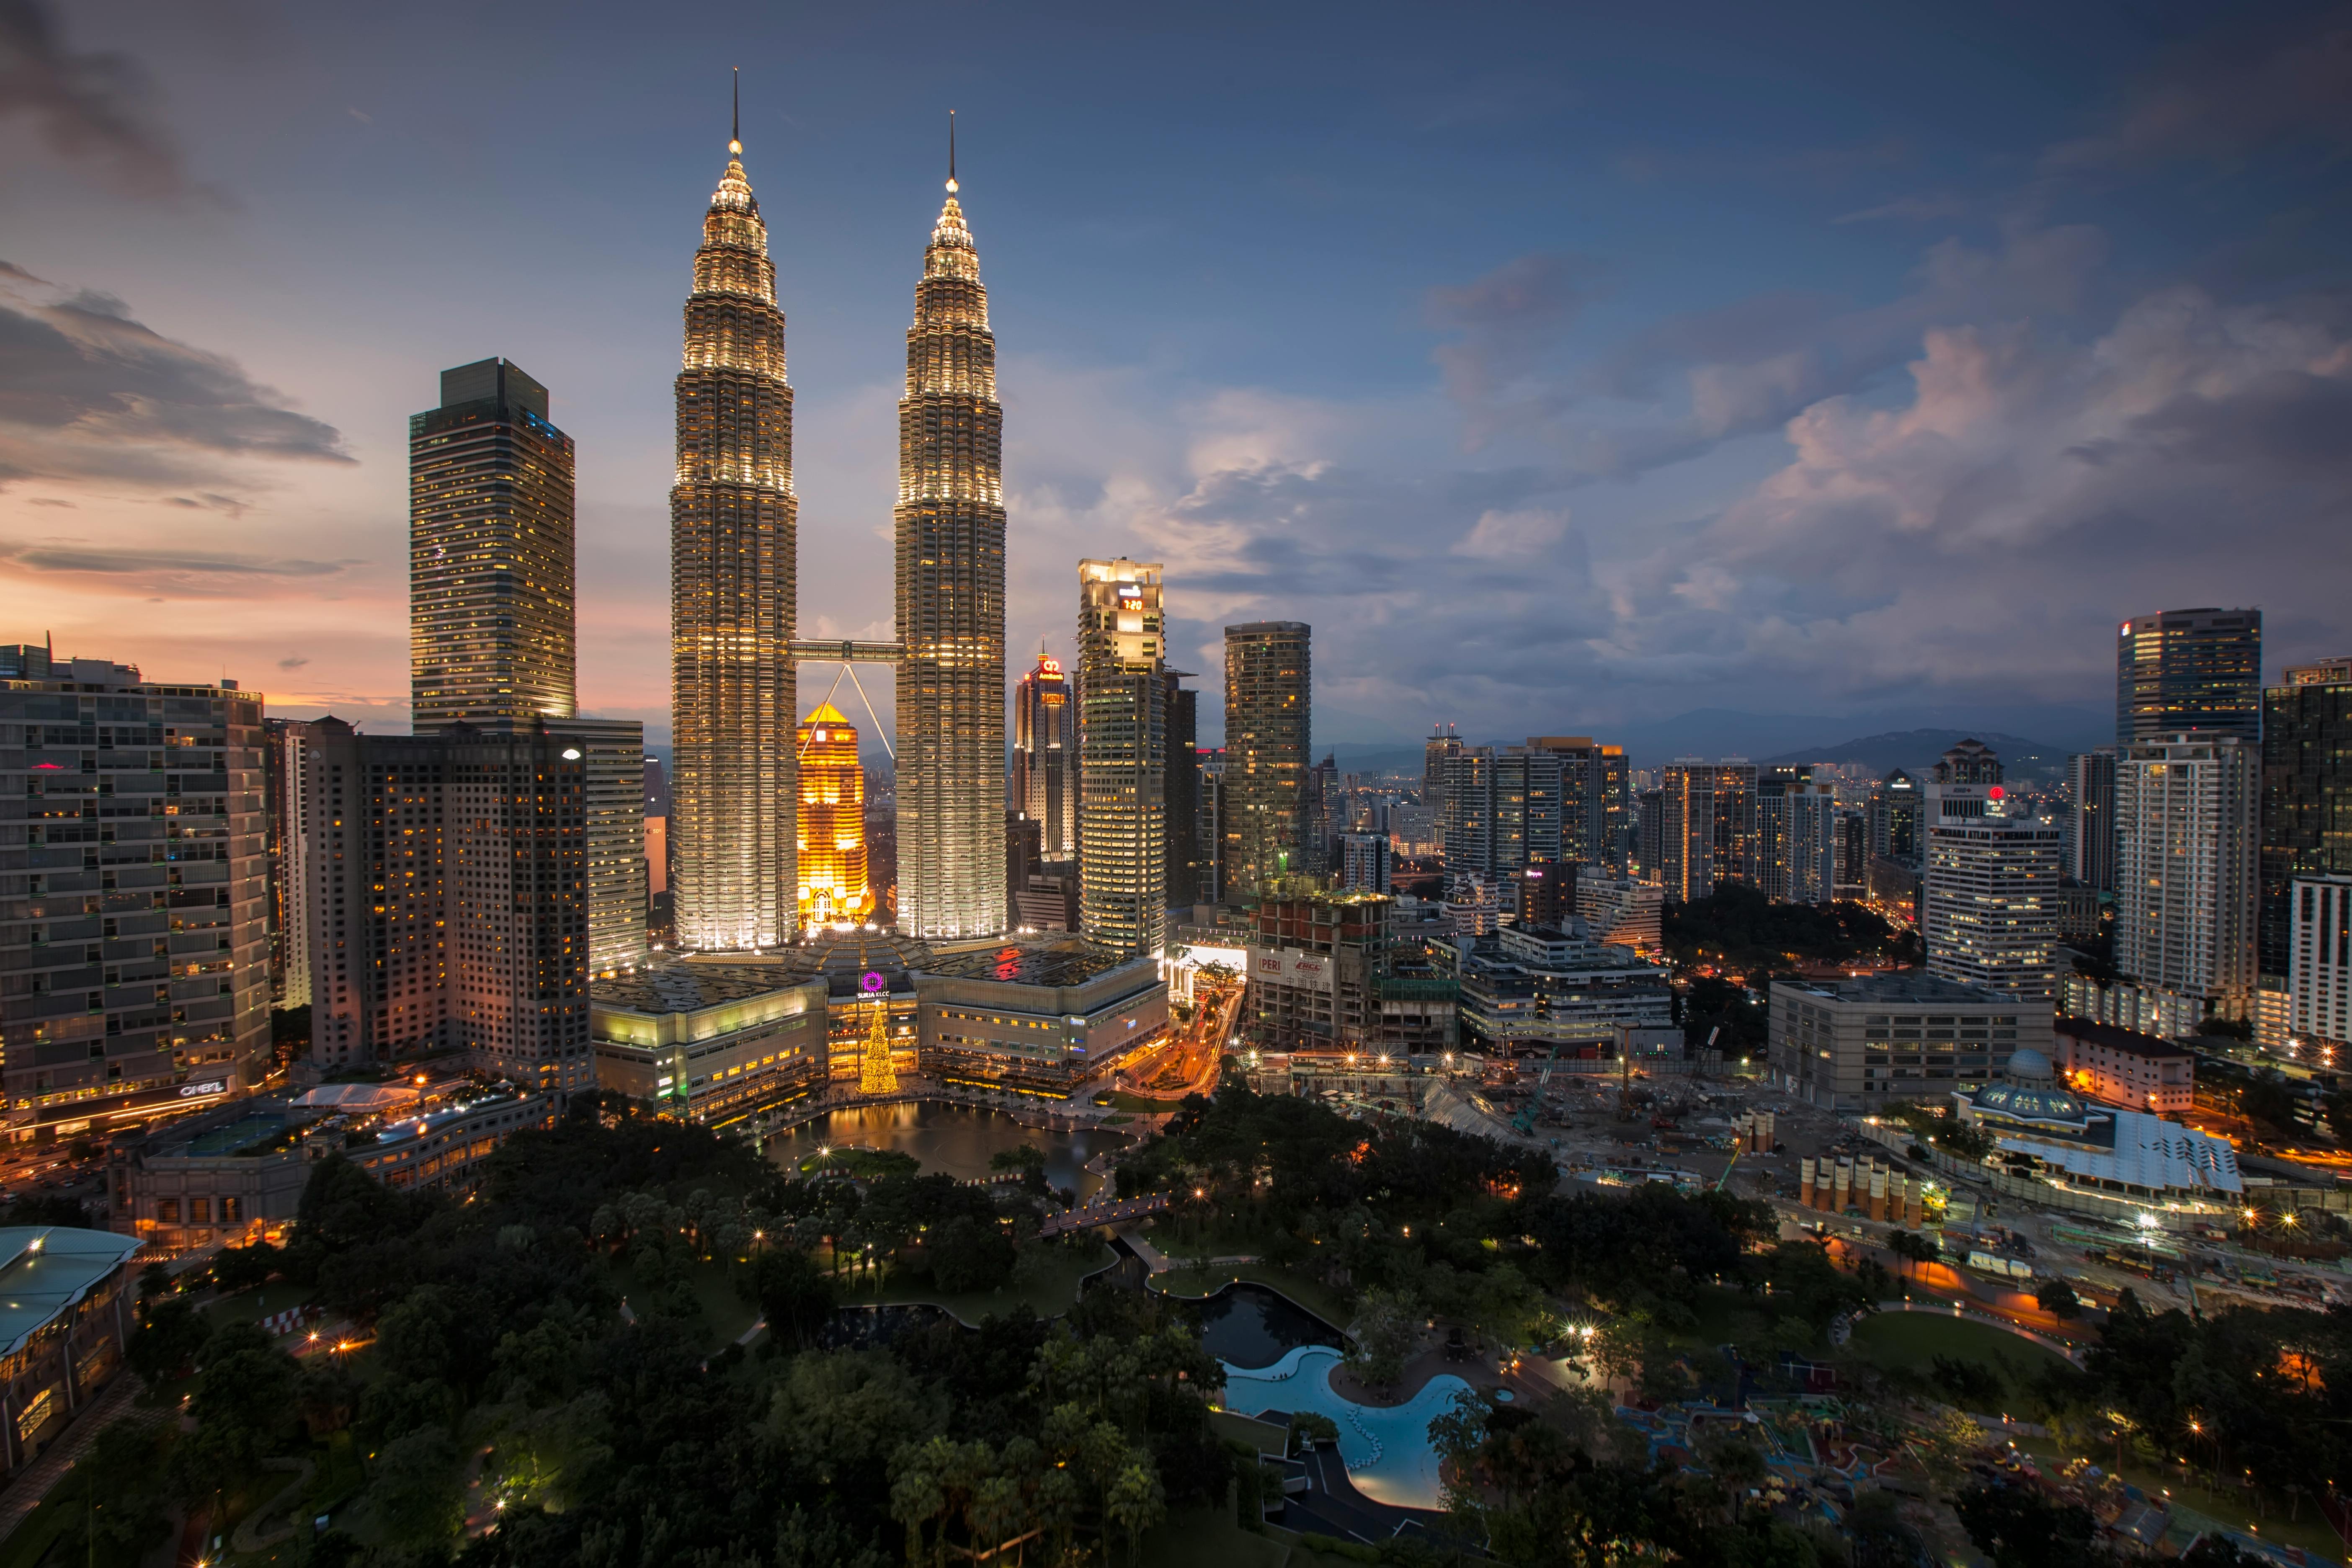 Download wallpapers 4k, Petronas Towers, traffic lights, skyscrapers, Kuala  Lumpur, Malaysia, night, Asia, Petronas Towers at evening for desktop free.  Pictures for desktop free